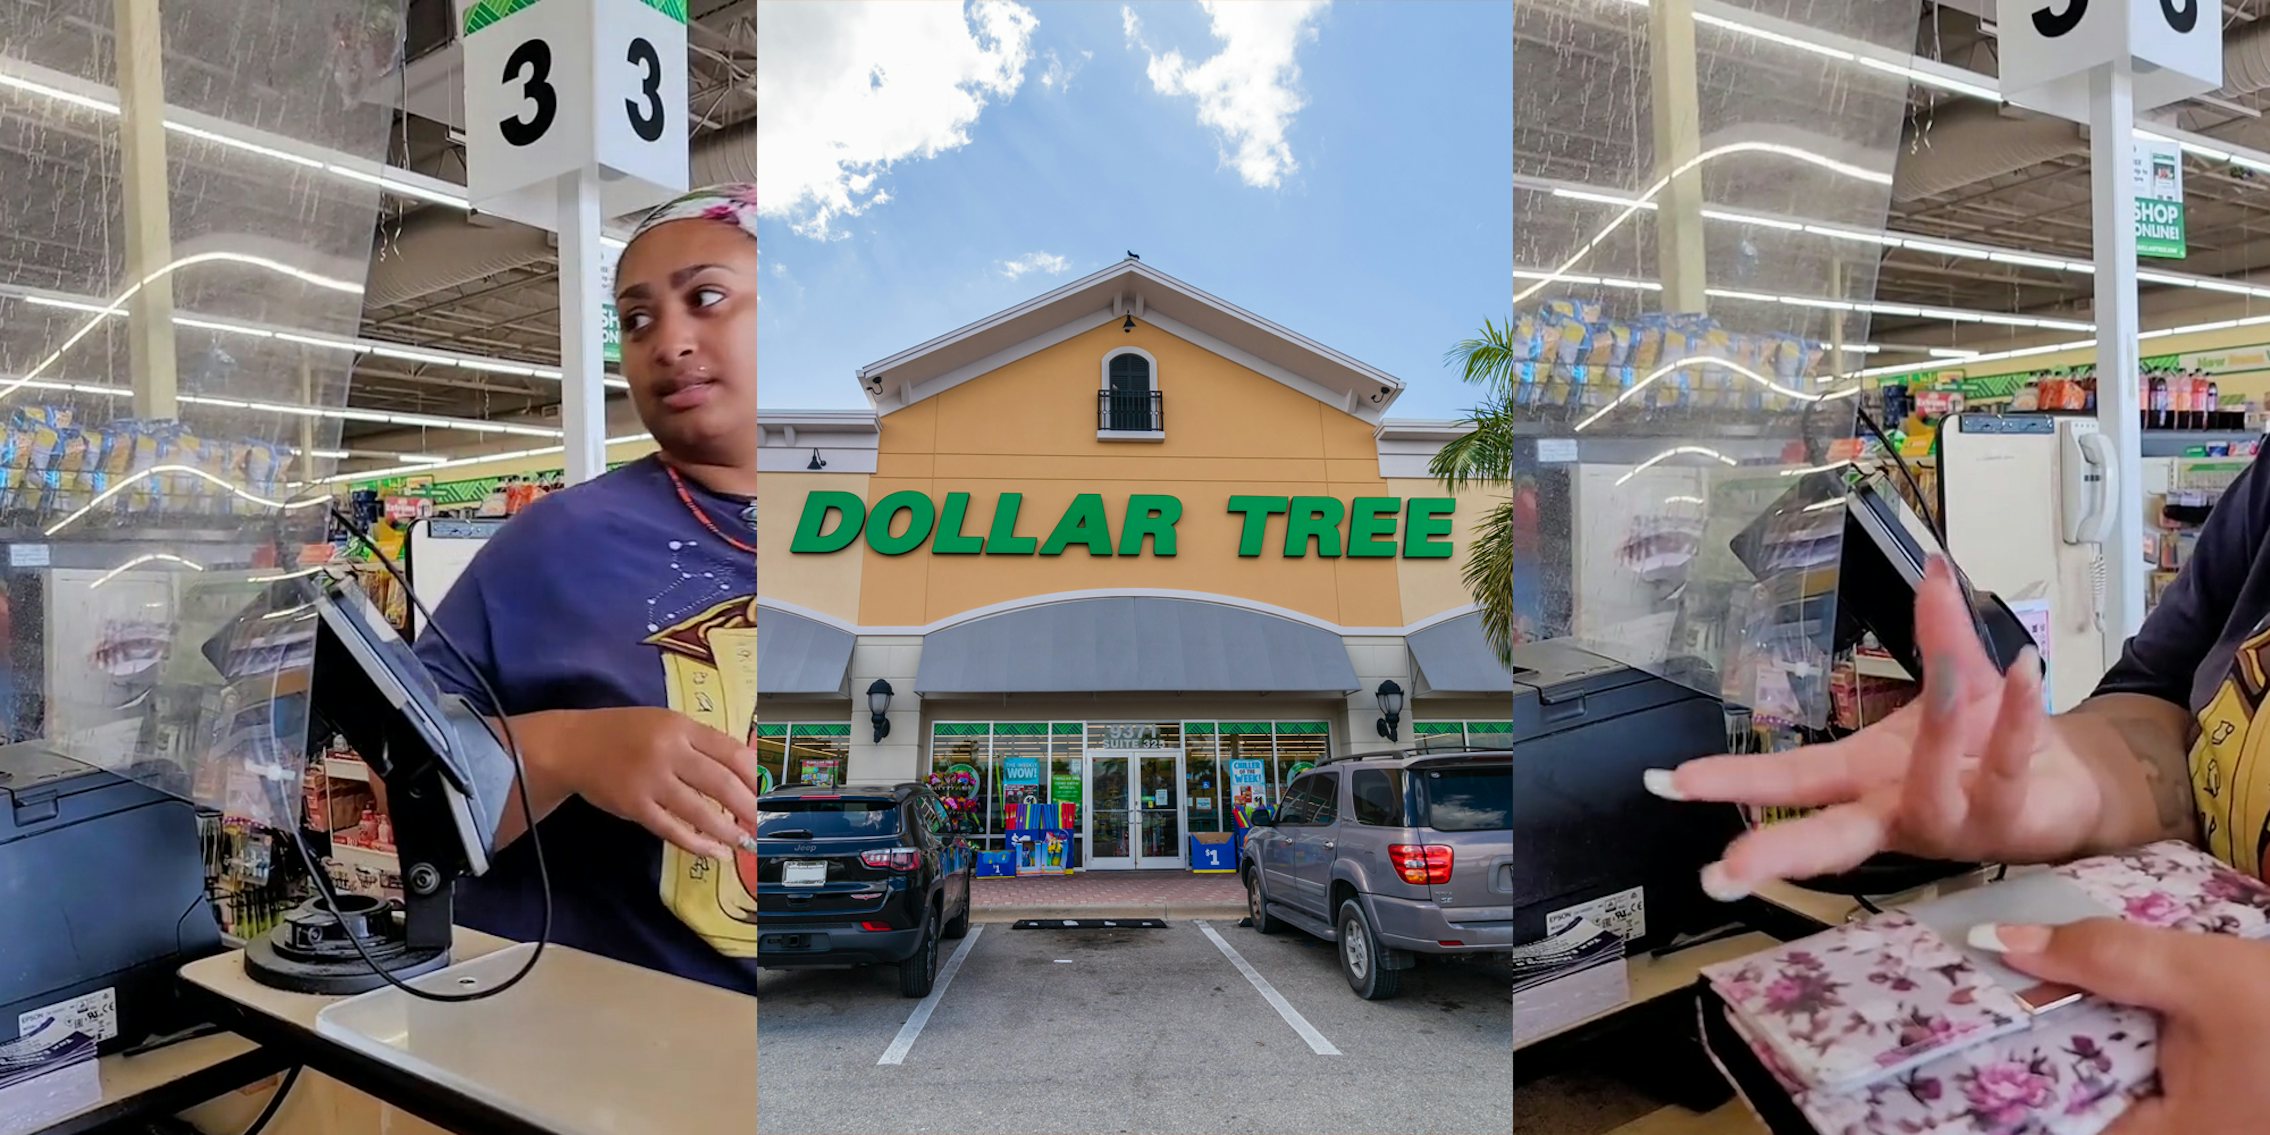 woman walking up to Dollar Tree checkout (l) Dollar Tree store building with sign (c) woman speaking with hand out at Dollar Tree checkout (r)